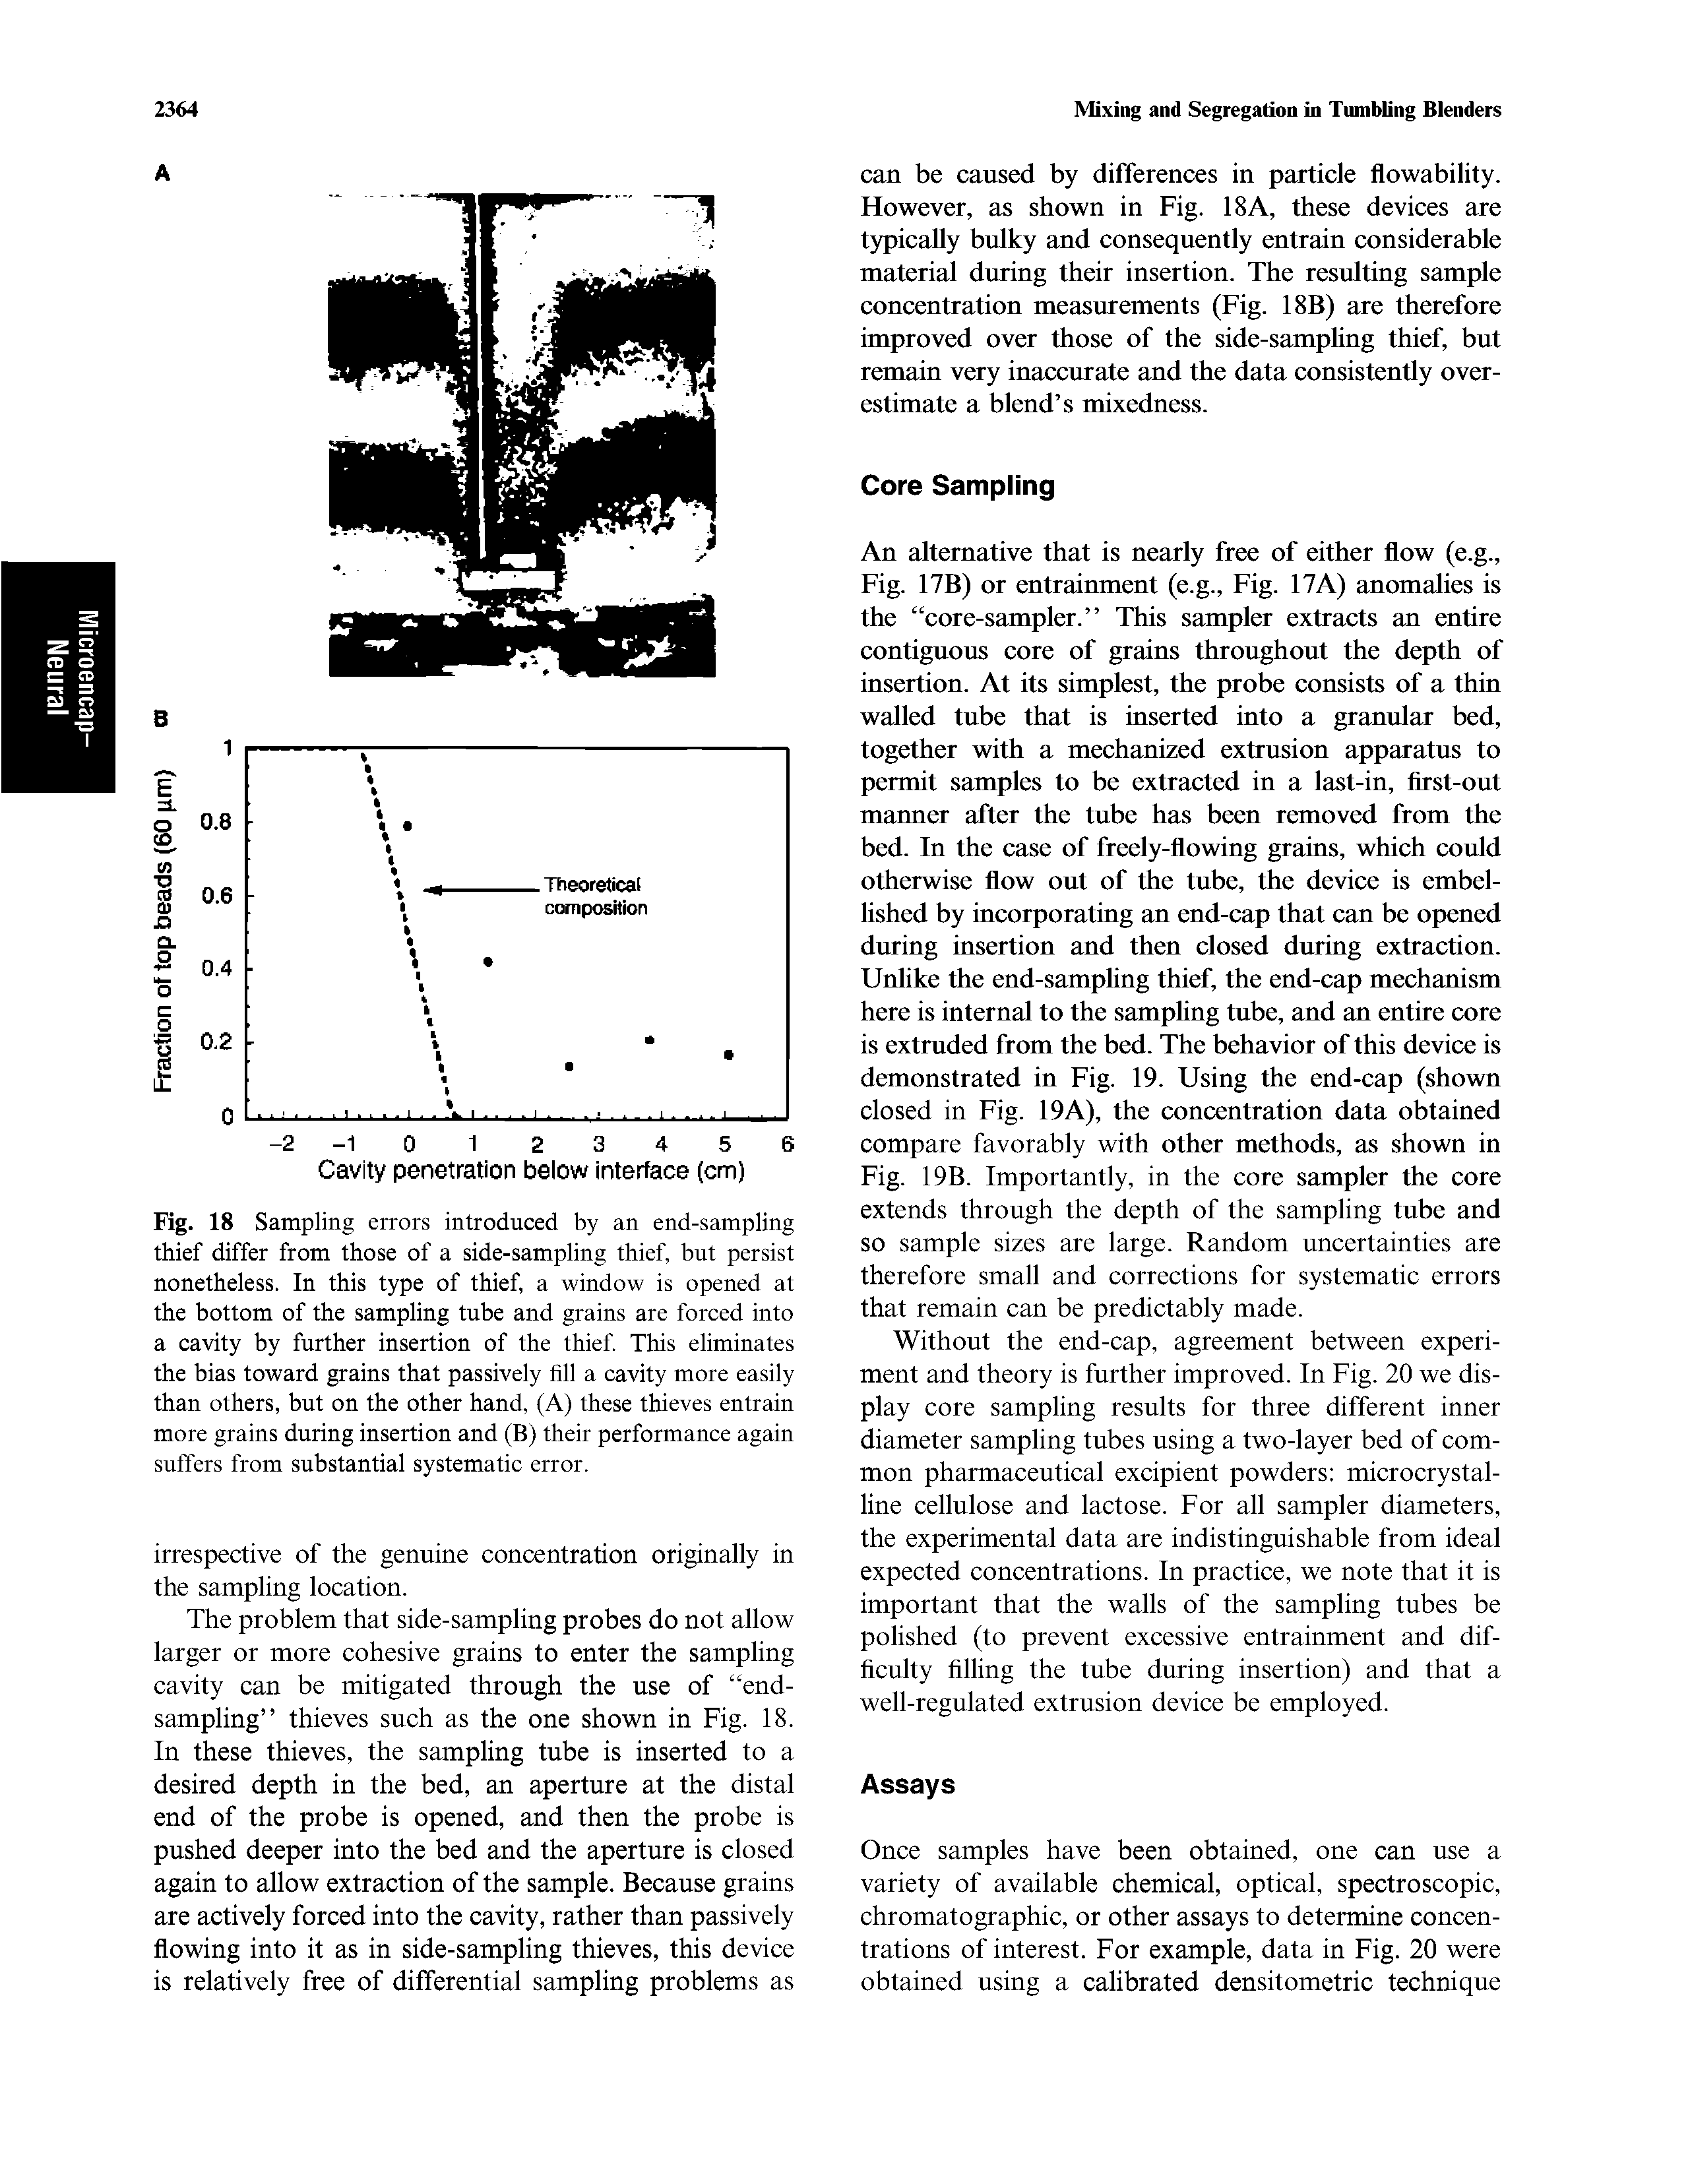 Fig. 18 Sampling errors introduced by an end-sampling thief differ from those of a side-sampling thief, but persist nonetheless. In this type of thief, a window is opened at the bottom of the sampling tube and grains are forced into a cavity by further insertion of the thief This eliminates the bias toward grains that passively fill a cavity more easily than others, but on the other hand, (A) these thieves entrain more grains during insertion and (B) their performance again suffers from substantial systematic error.